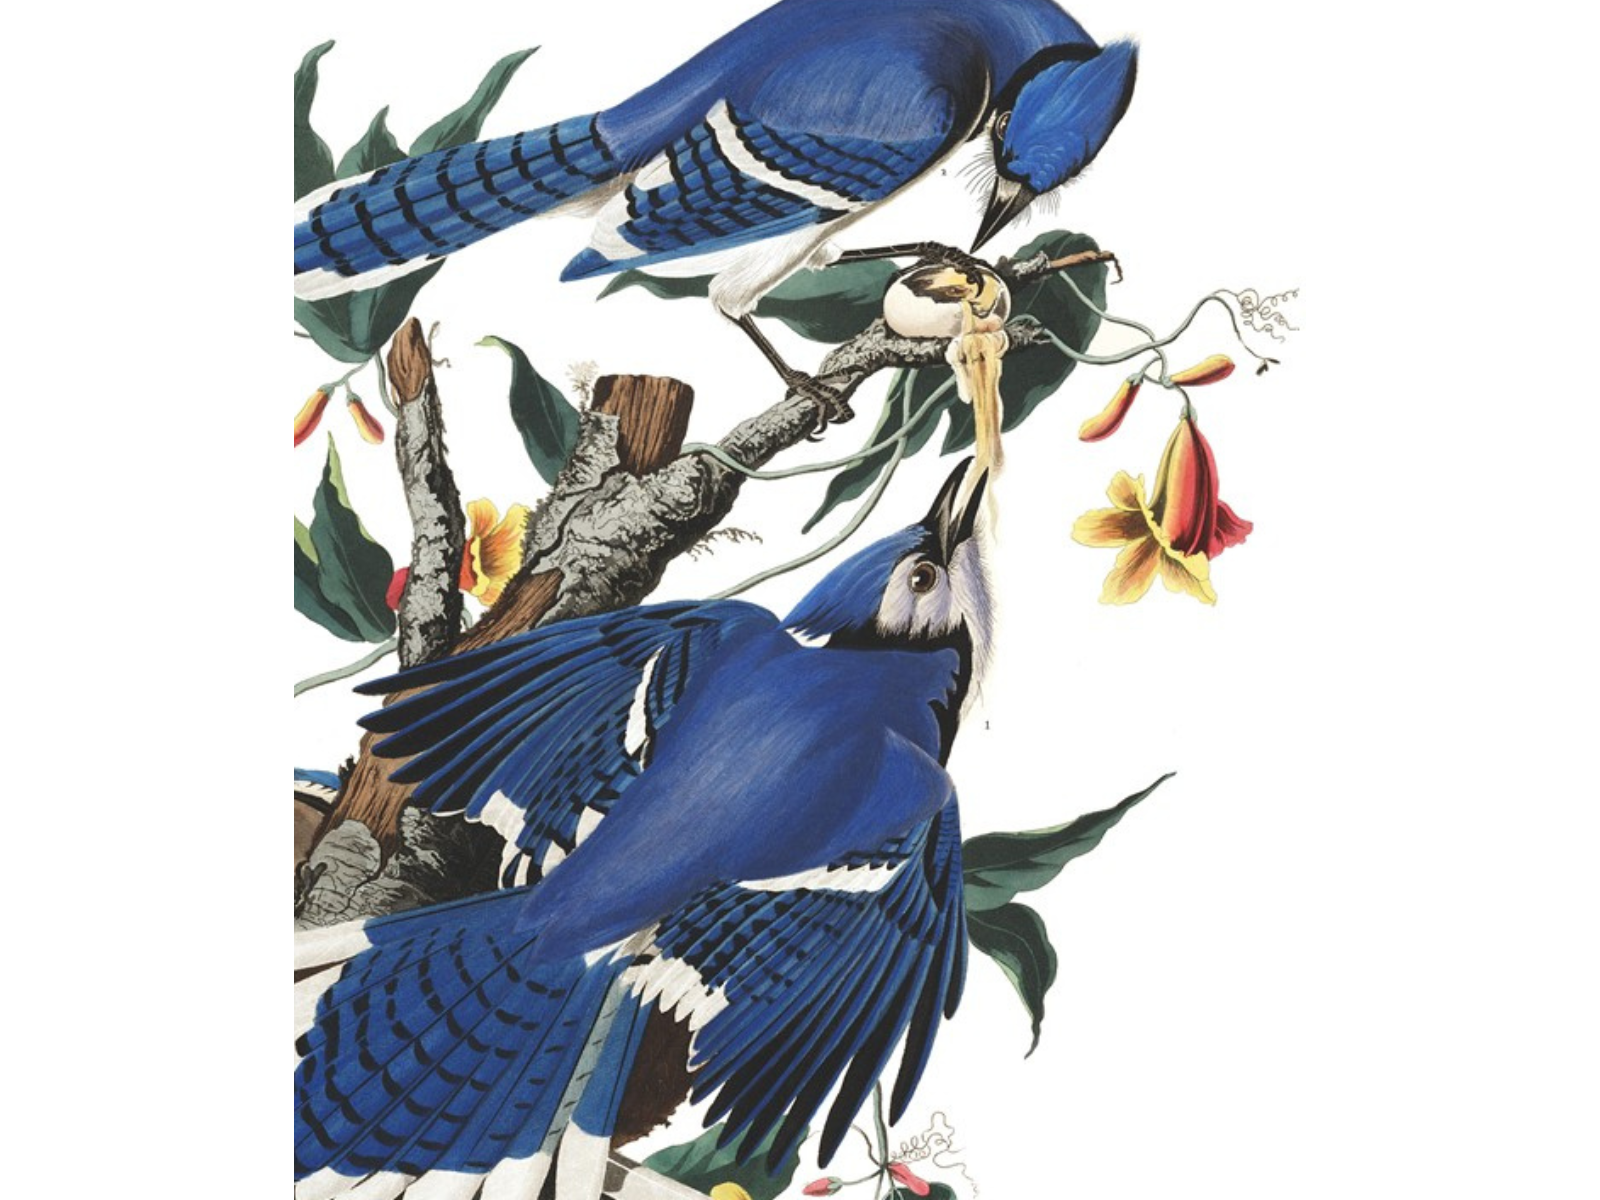 An artist's drawing of two blue jays on a tree branch. The lower of the two birds is posed with wings partially extended and head tilted up with open beak.